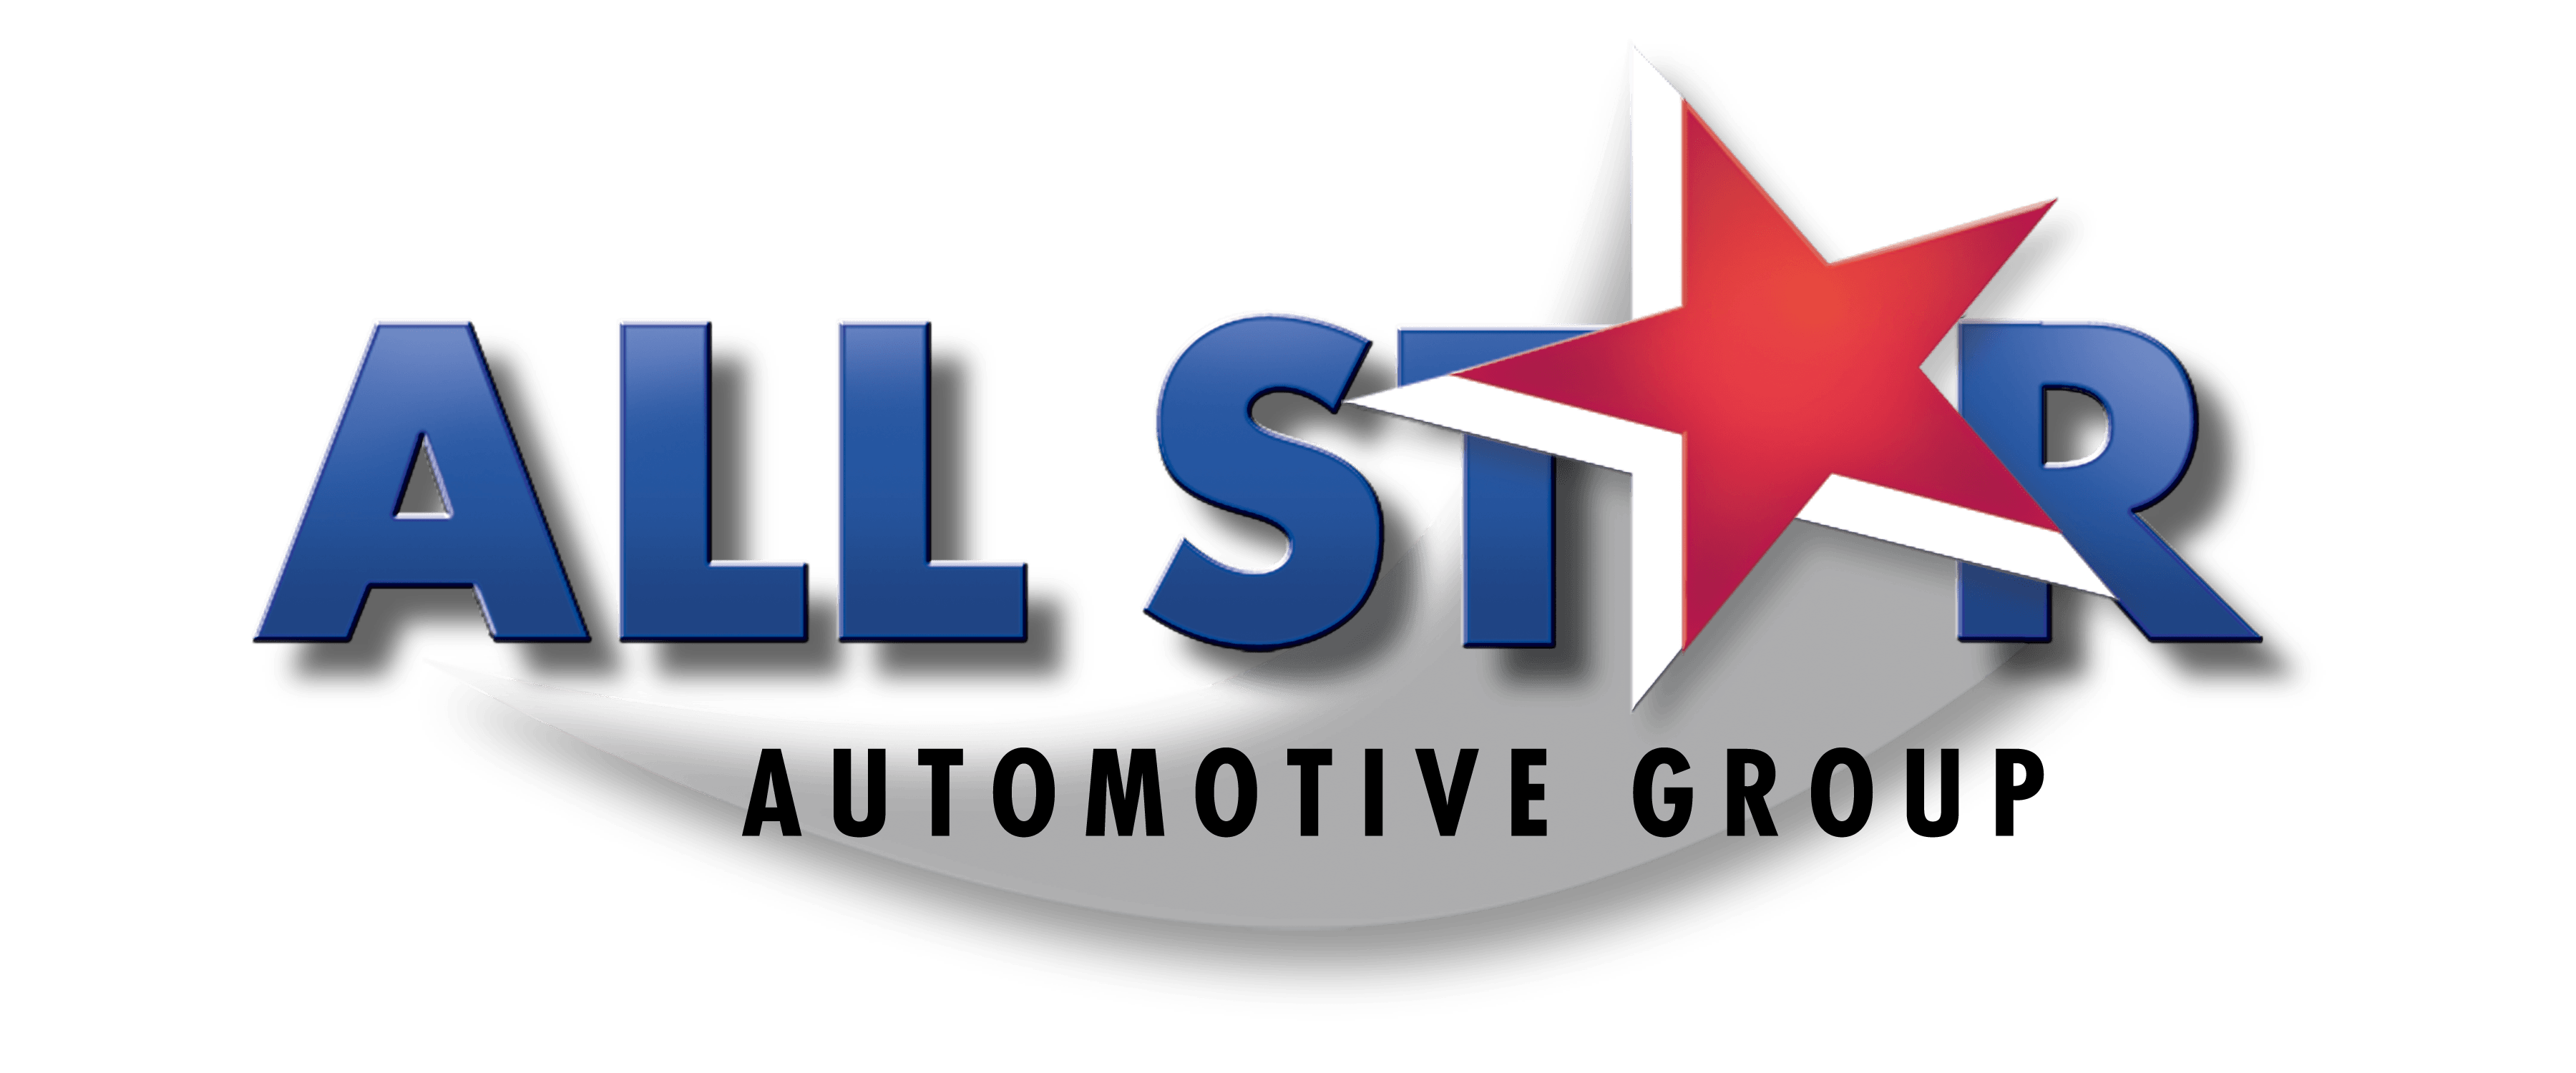 Star Automobile Logo - All Star Chevrolet is a Baton Rouge Chevrolet dealer and a new car